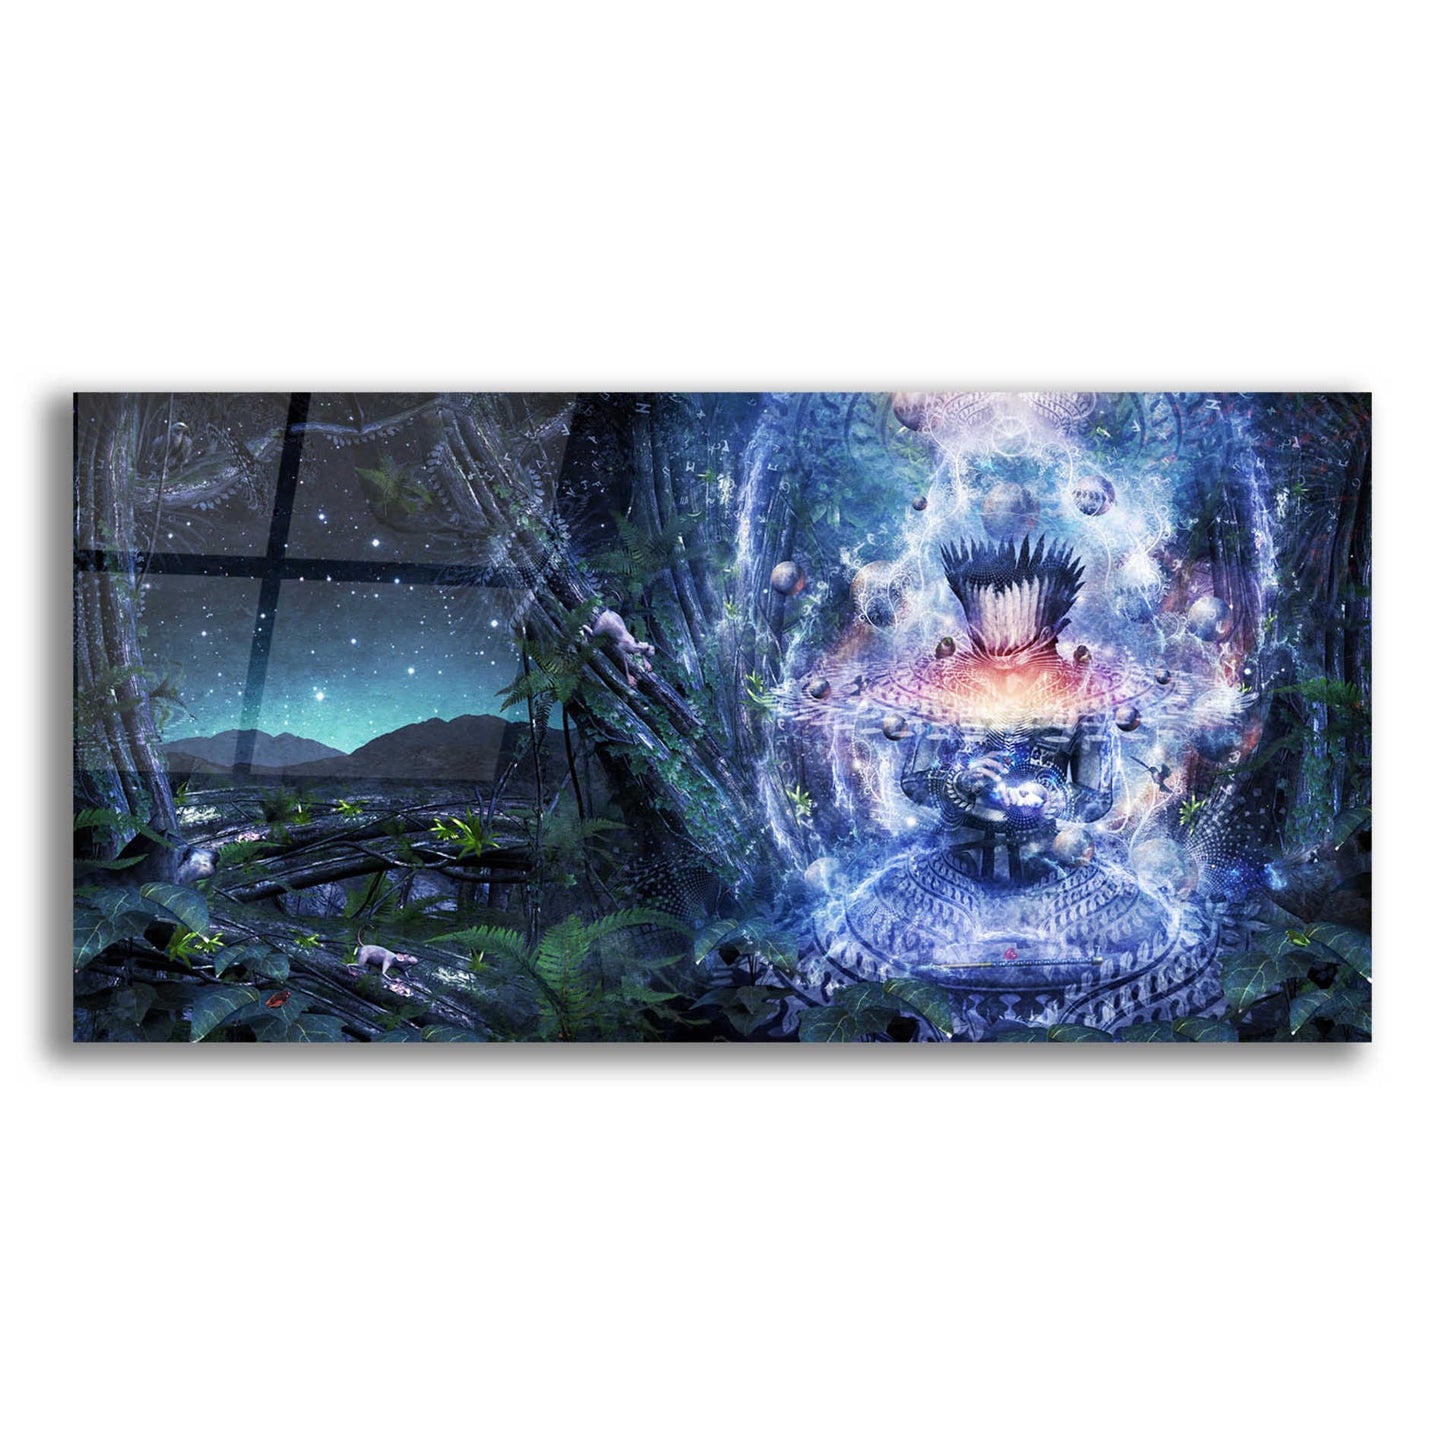 Epic Art 'From The Broken Grow The Saved' by Cameron Gray, Acrylic Glass Wall Art,24x12